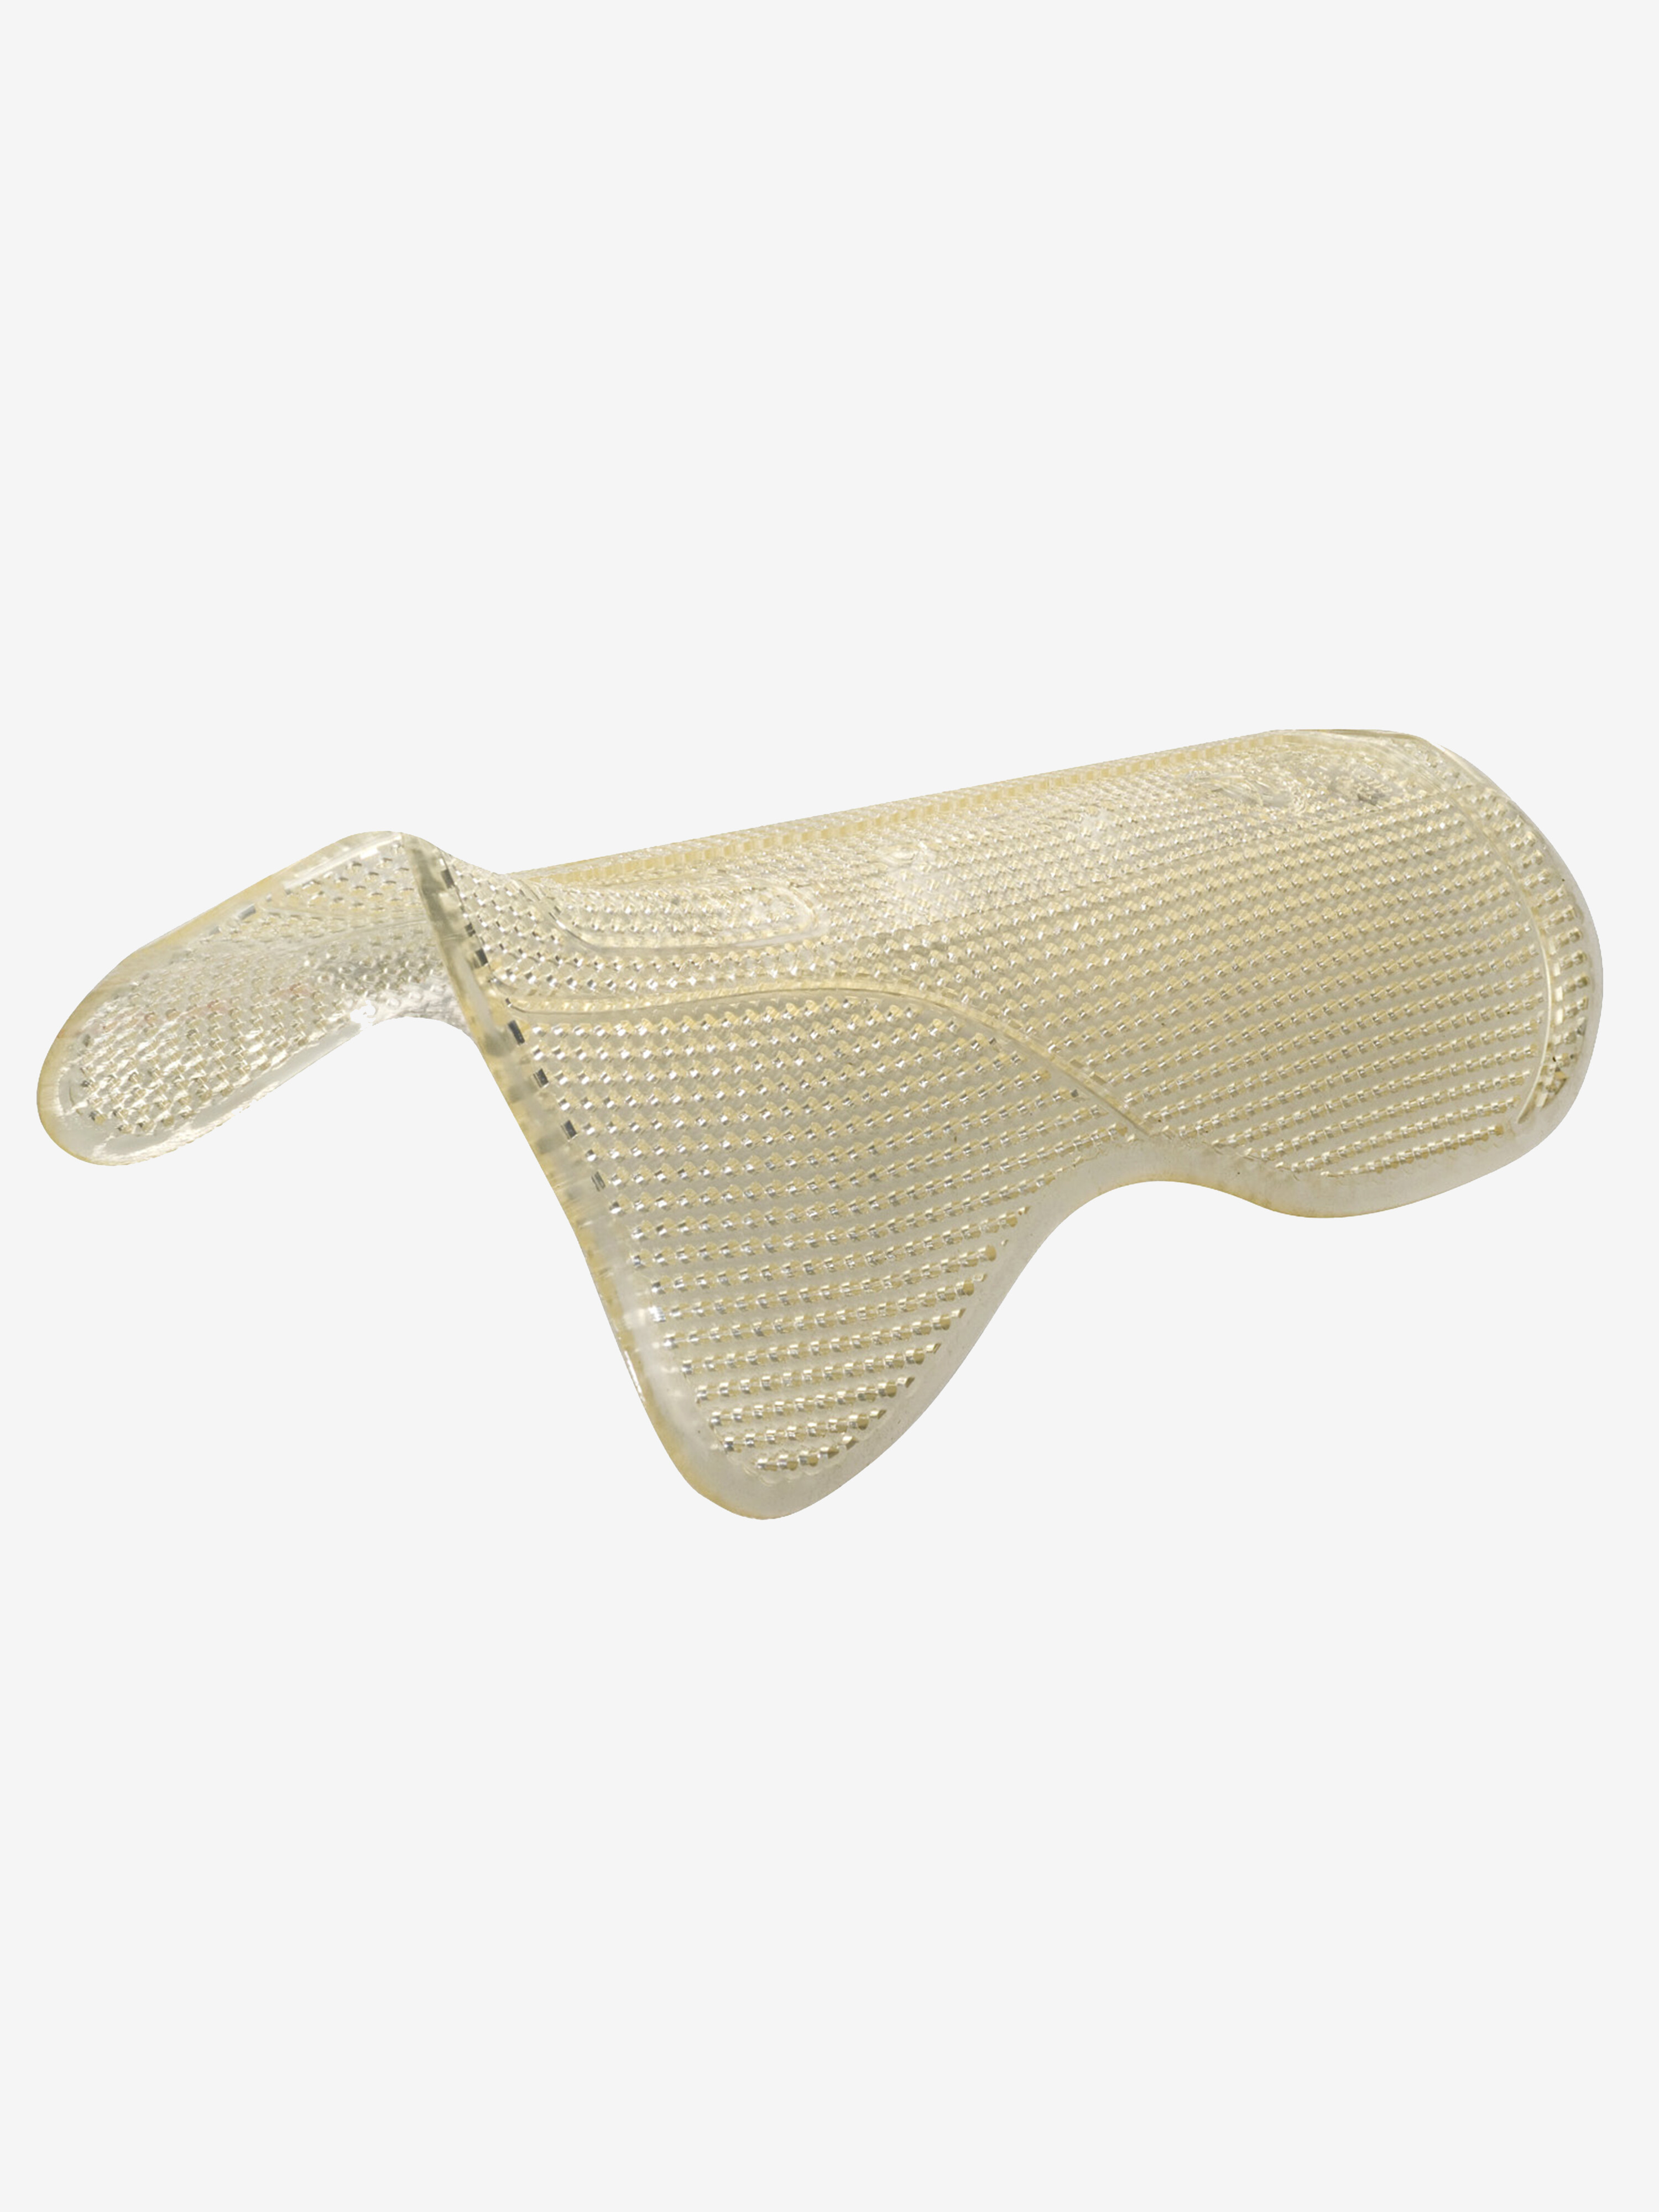 Acavallo Air Release Shock Absorbing Non Slip Shaped Gel Pad Horse Clear